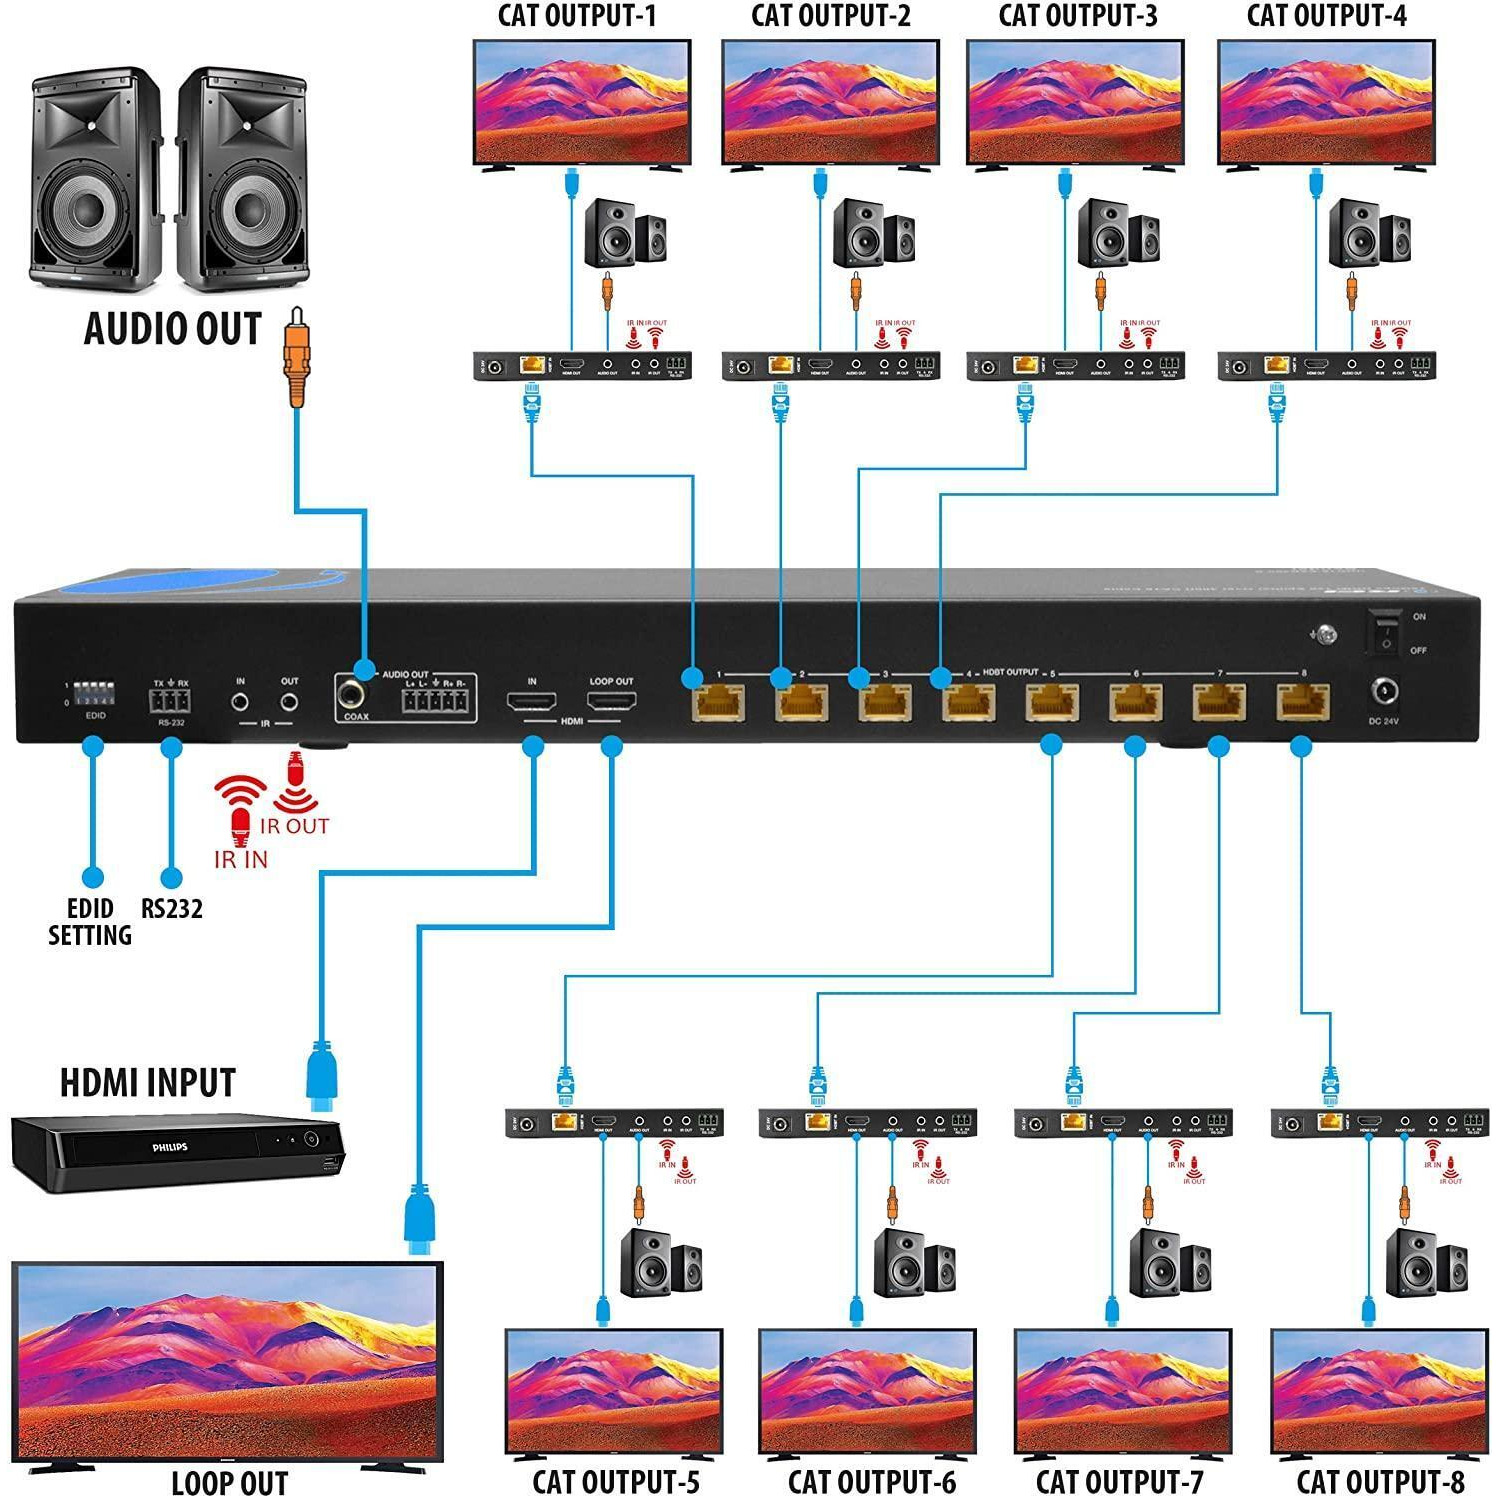 1x8 HDMI Extender Splitter HDBaseT 4K by OREI Multiple Over Single Cable CAT6/7 4K@60Hz 4:4:4 HDCP 2.2 with IR Remote EDID Management, HDR - Up to 400 Ft - Loop Out - Low Latency - Full Support alternate image